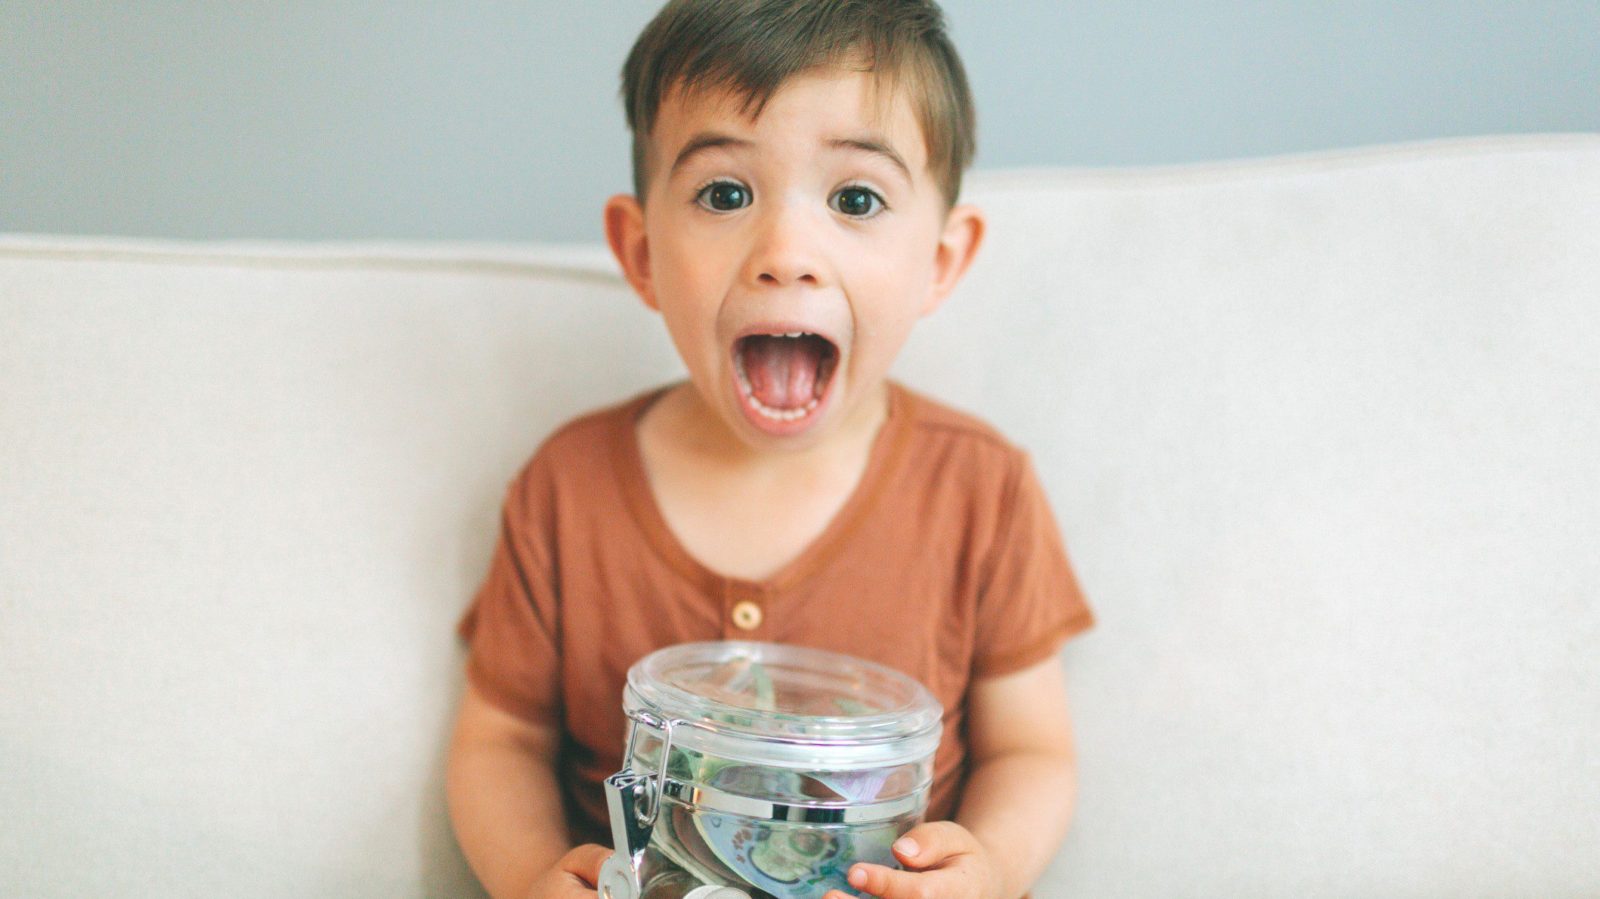 child sitting on couch making a surprised face and holding a jar of money; teaching kids about money